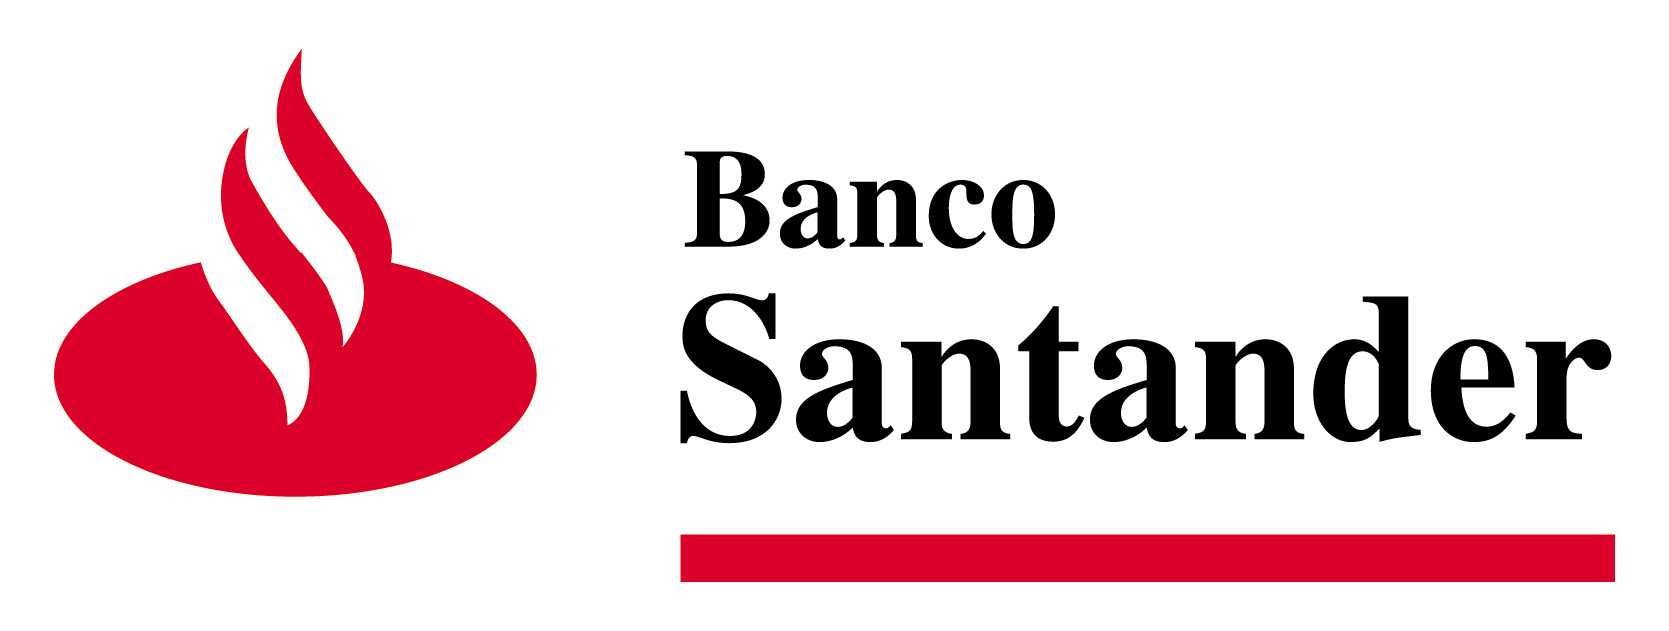 Banco Santander Uruguay Chooses Cryptomathic And Icpayment To Deliver Card Issuance Platform